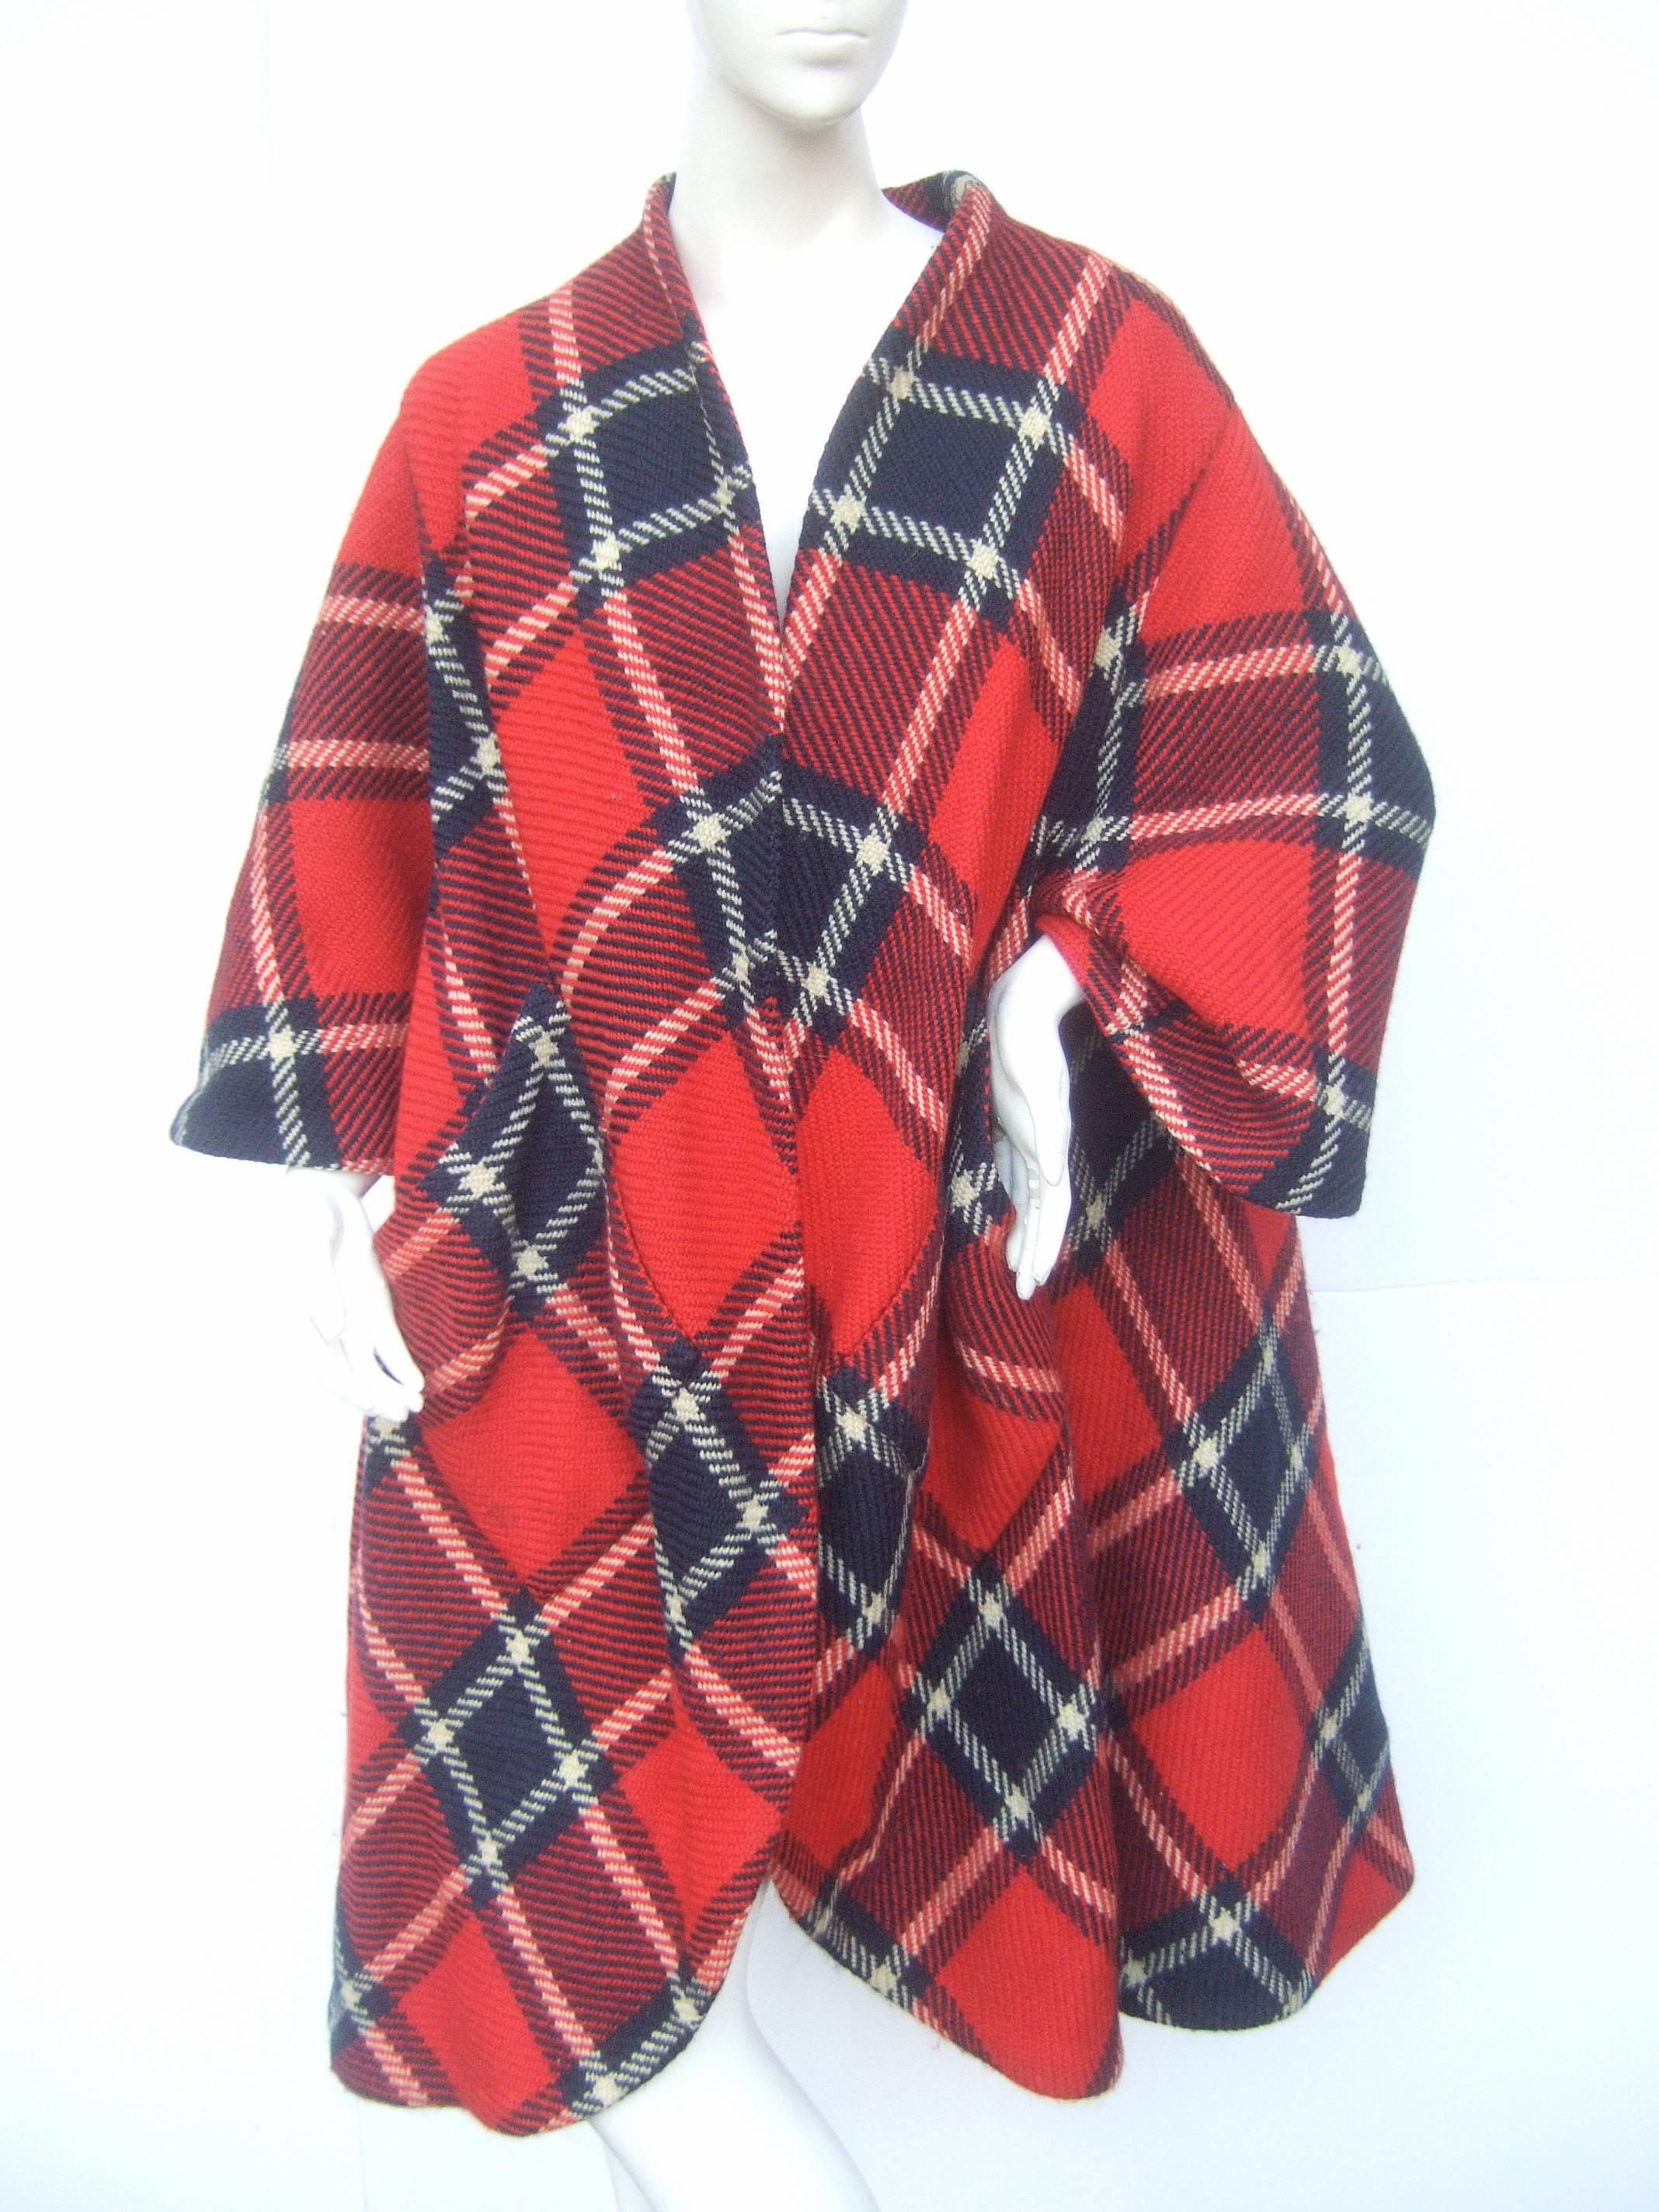 1960s Pauline Trigere Mod plaid wool swing coat 
The stylish retro light weight coat is designed
with bold tartan plaid wool fabric 

The coat is designed with bracelet length
sleeves and two wide slant patch pockets 
on the front. The loose